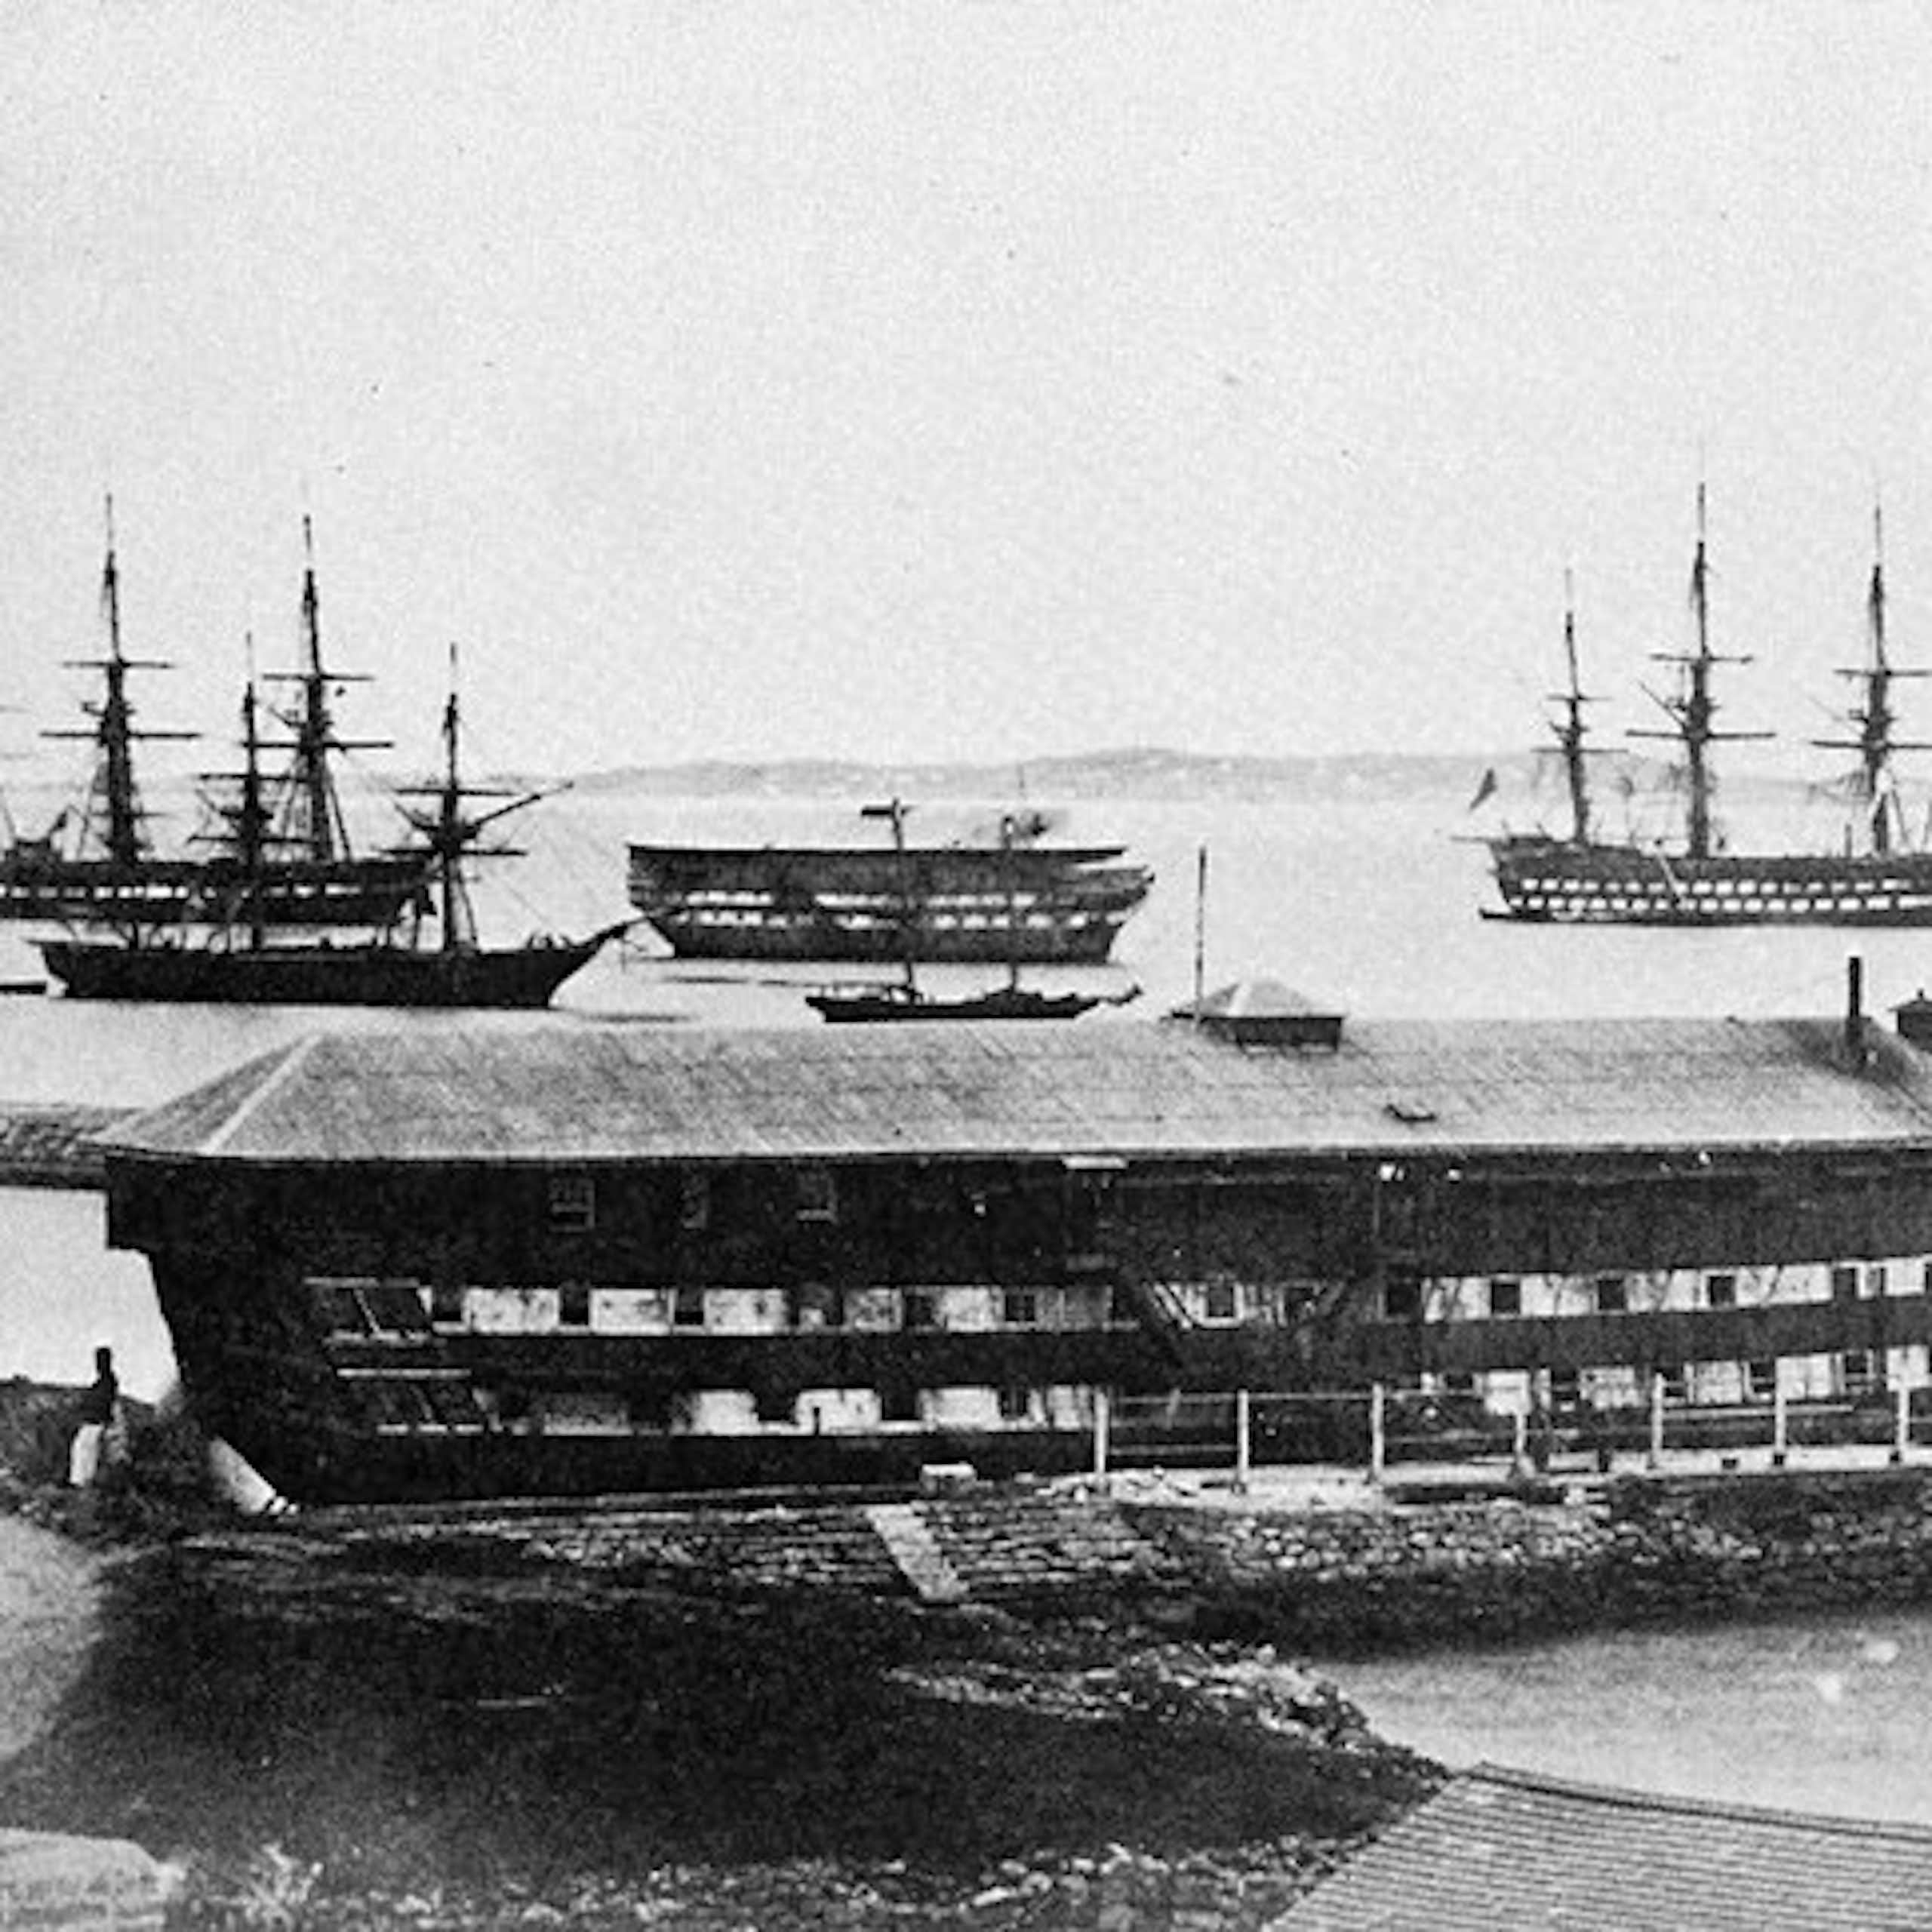 Archival black and white photo of eight ships in a harbour, a large prison ship is in the foreground